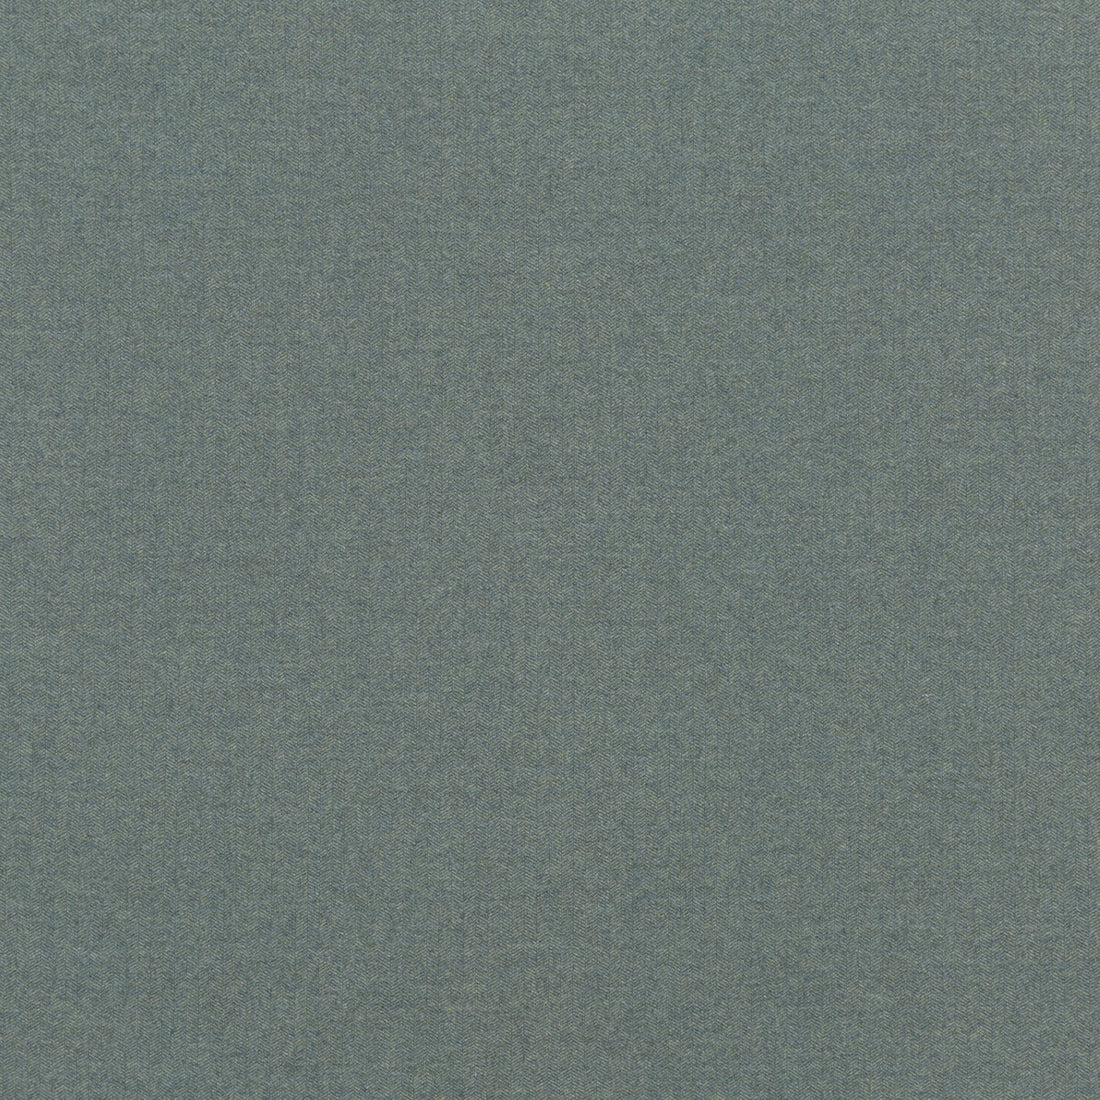 Leith fabric in teal color - pattern FD751.R11.0 - by Mulberry in the Festival collection